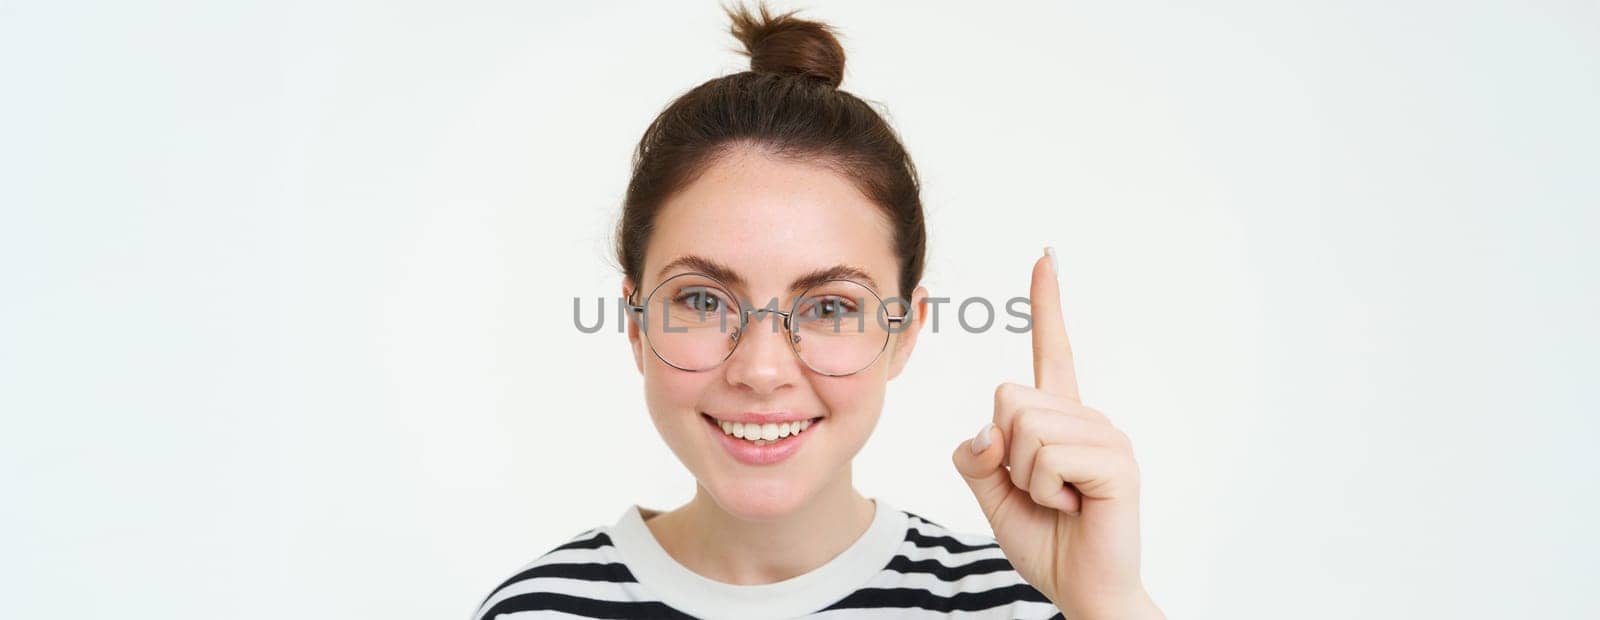 Image of woman in glasses, pointing finger up, showing advertisement on top, standing over white background. Copy space